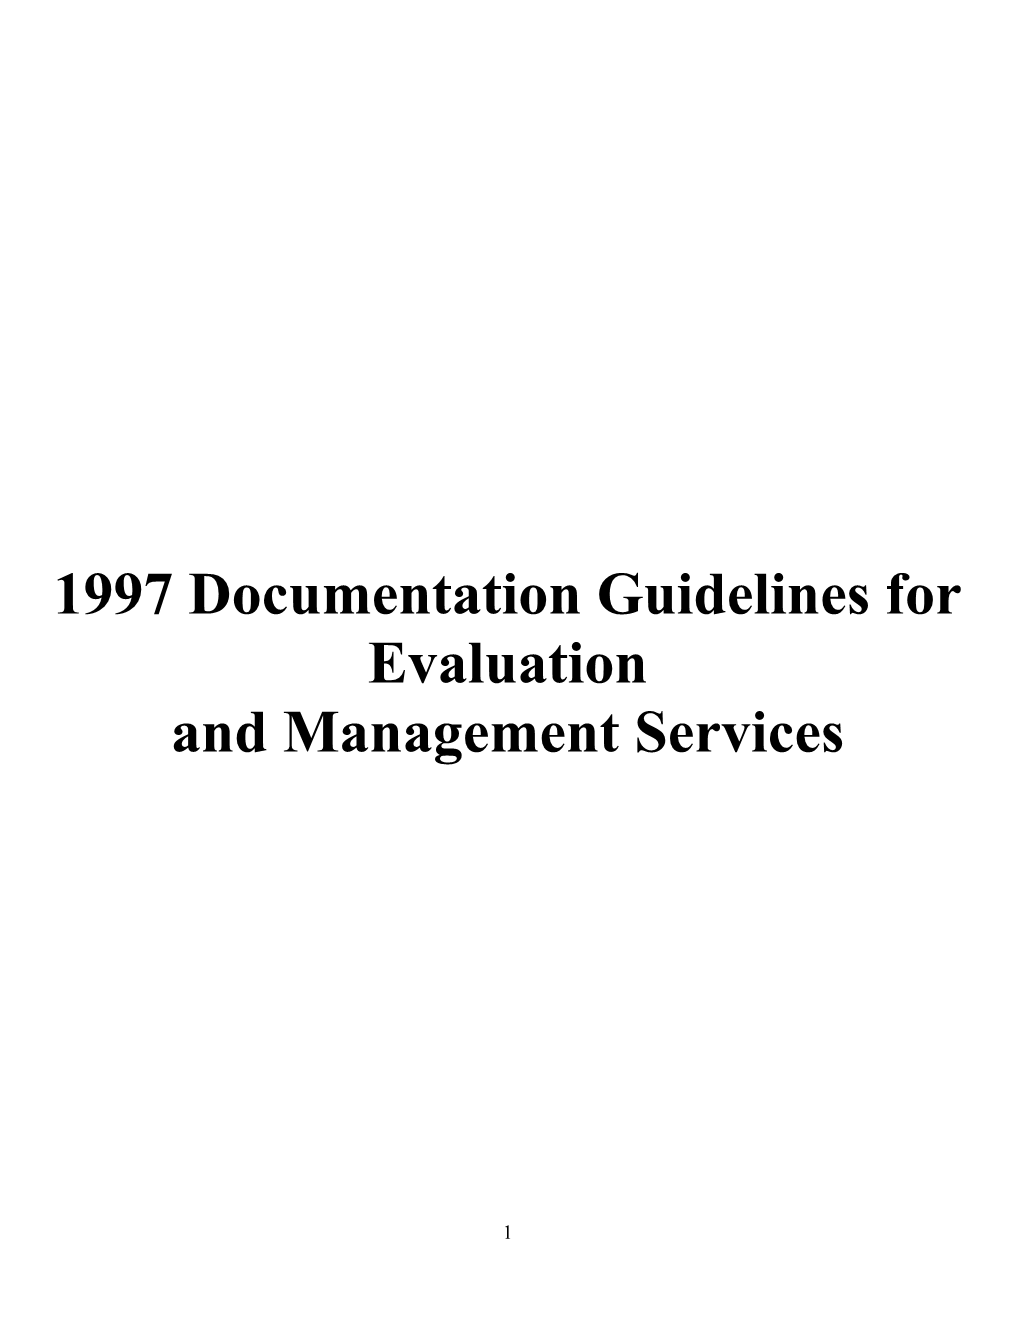 1997 Documentation Guidelines for Evaluation and Management Services